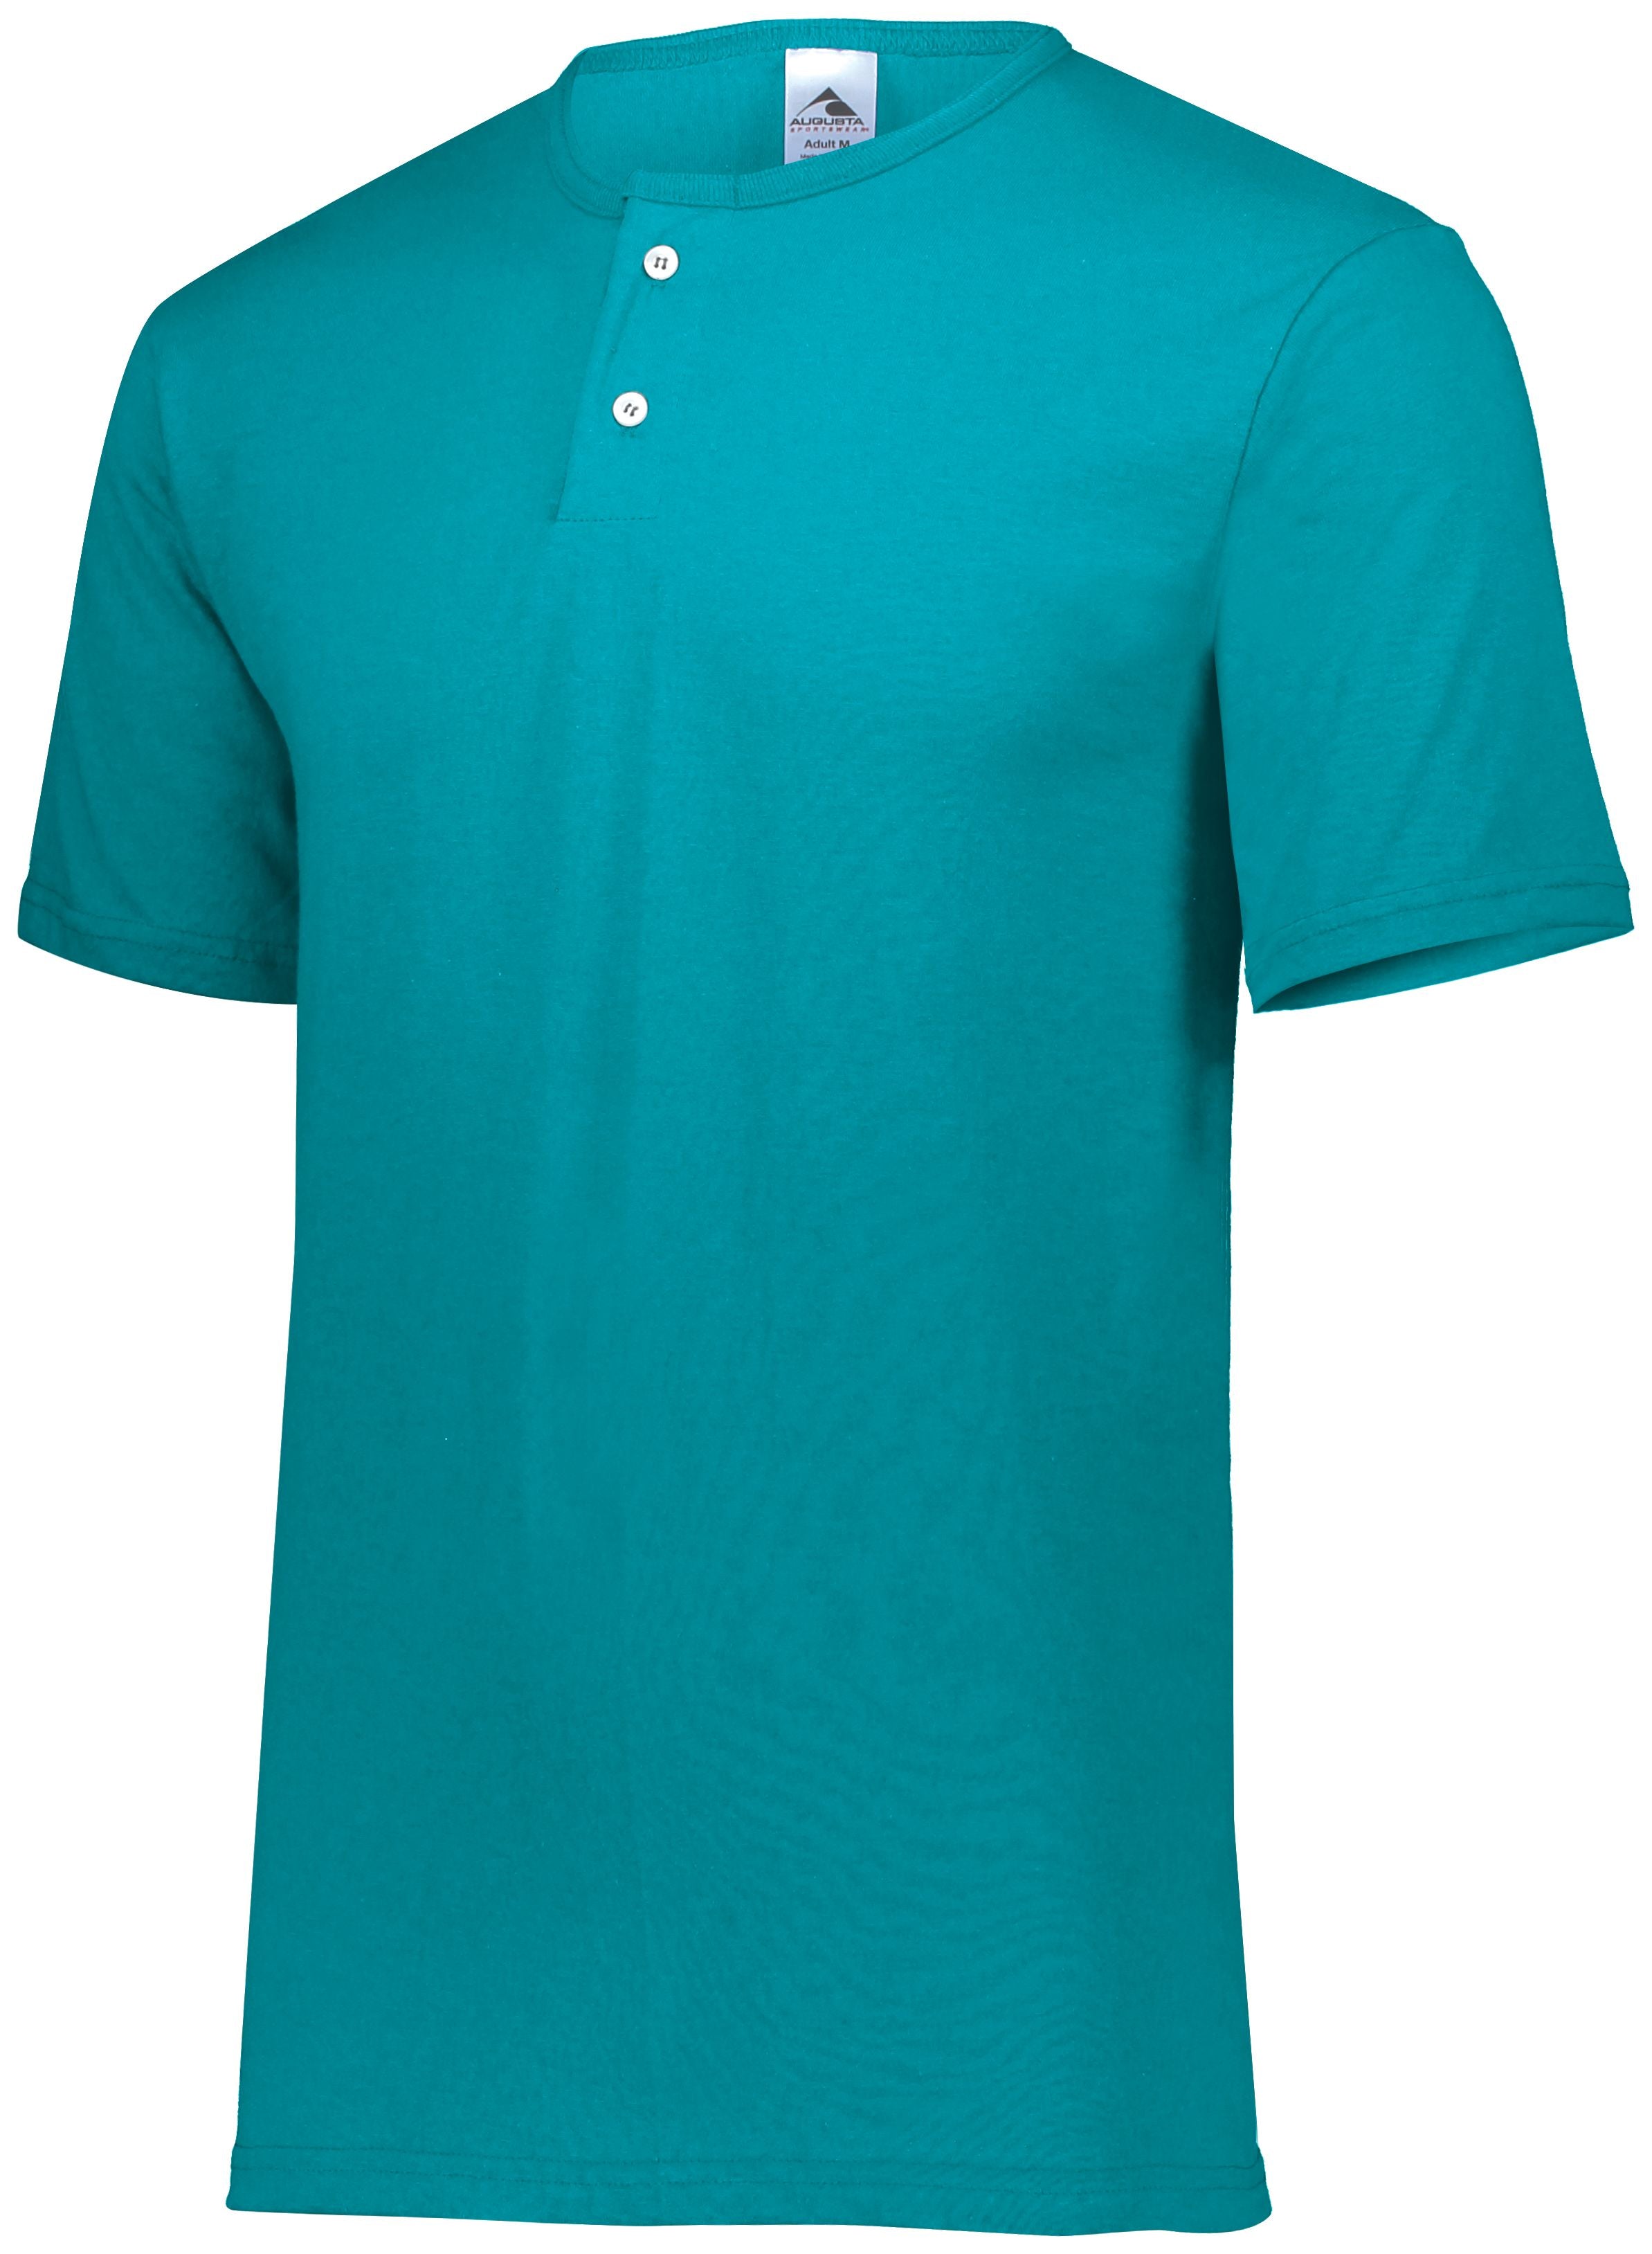 Augusta Sportswear Youth Two-Button Baseball Jersey in Teal  -Part of the Youth, Youth-Jersey, Augusta-Products, Baseball, Shirts, All-Sports, All-Sports-1 product lines at KanaleyCreations.com